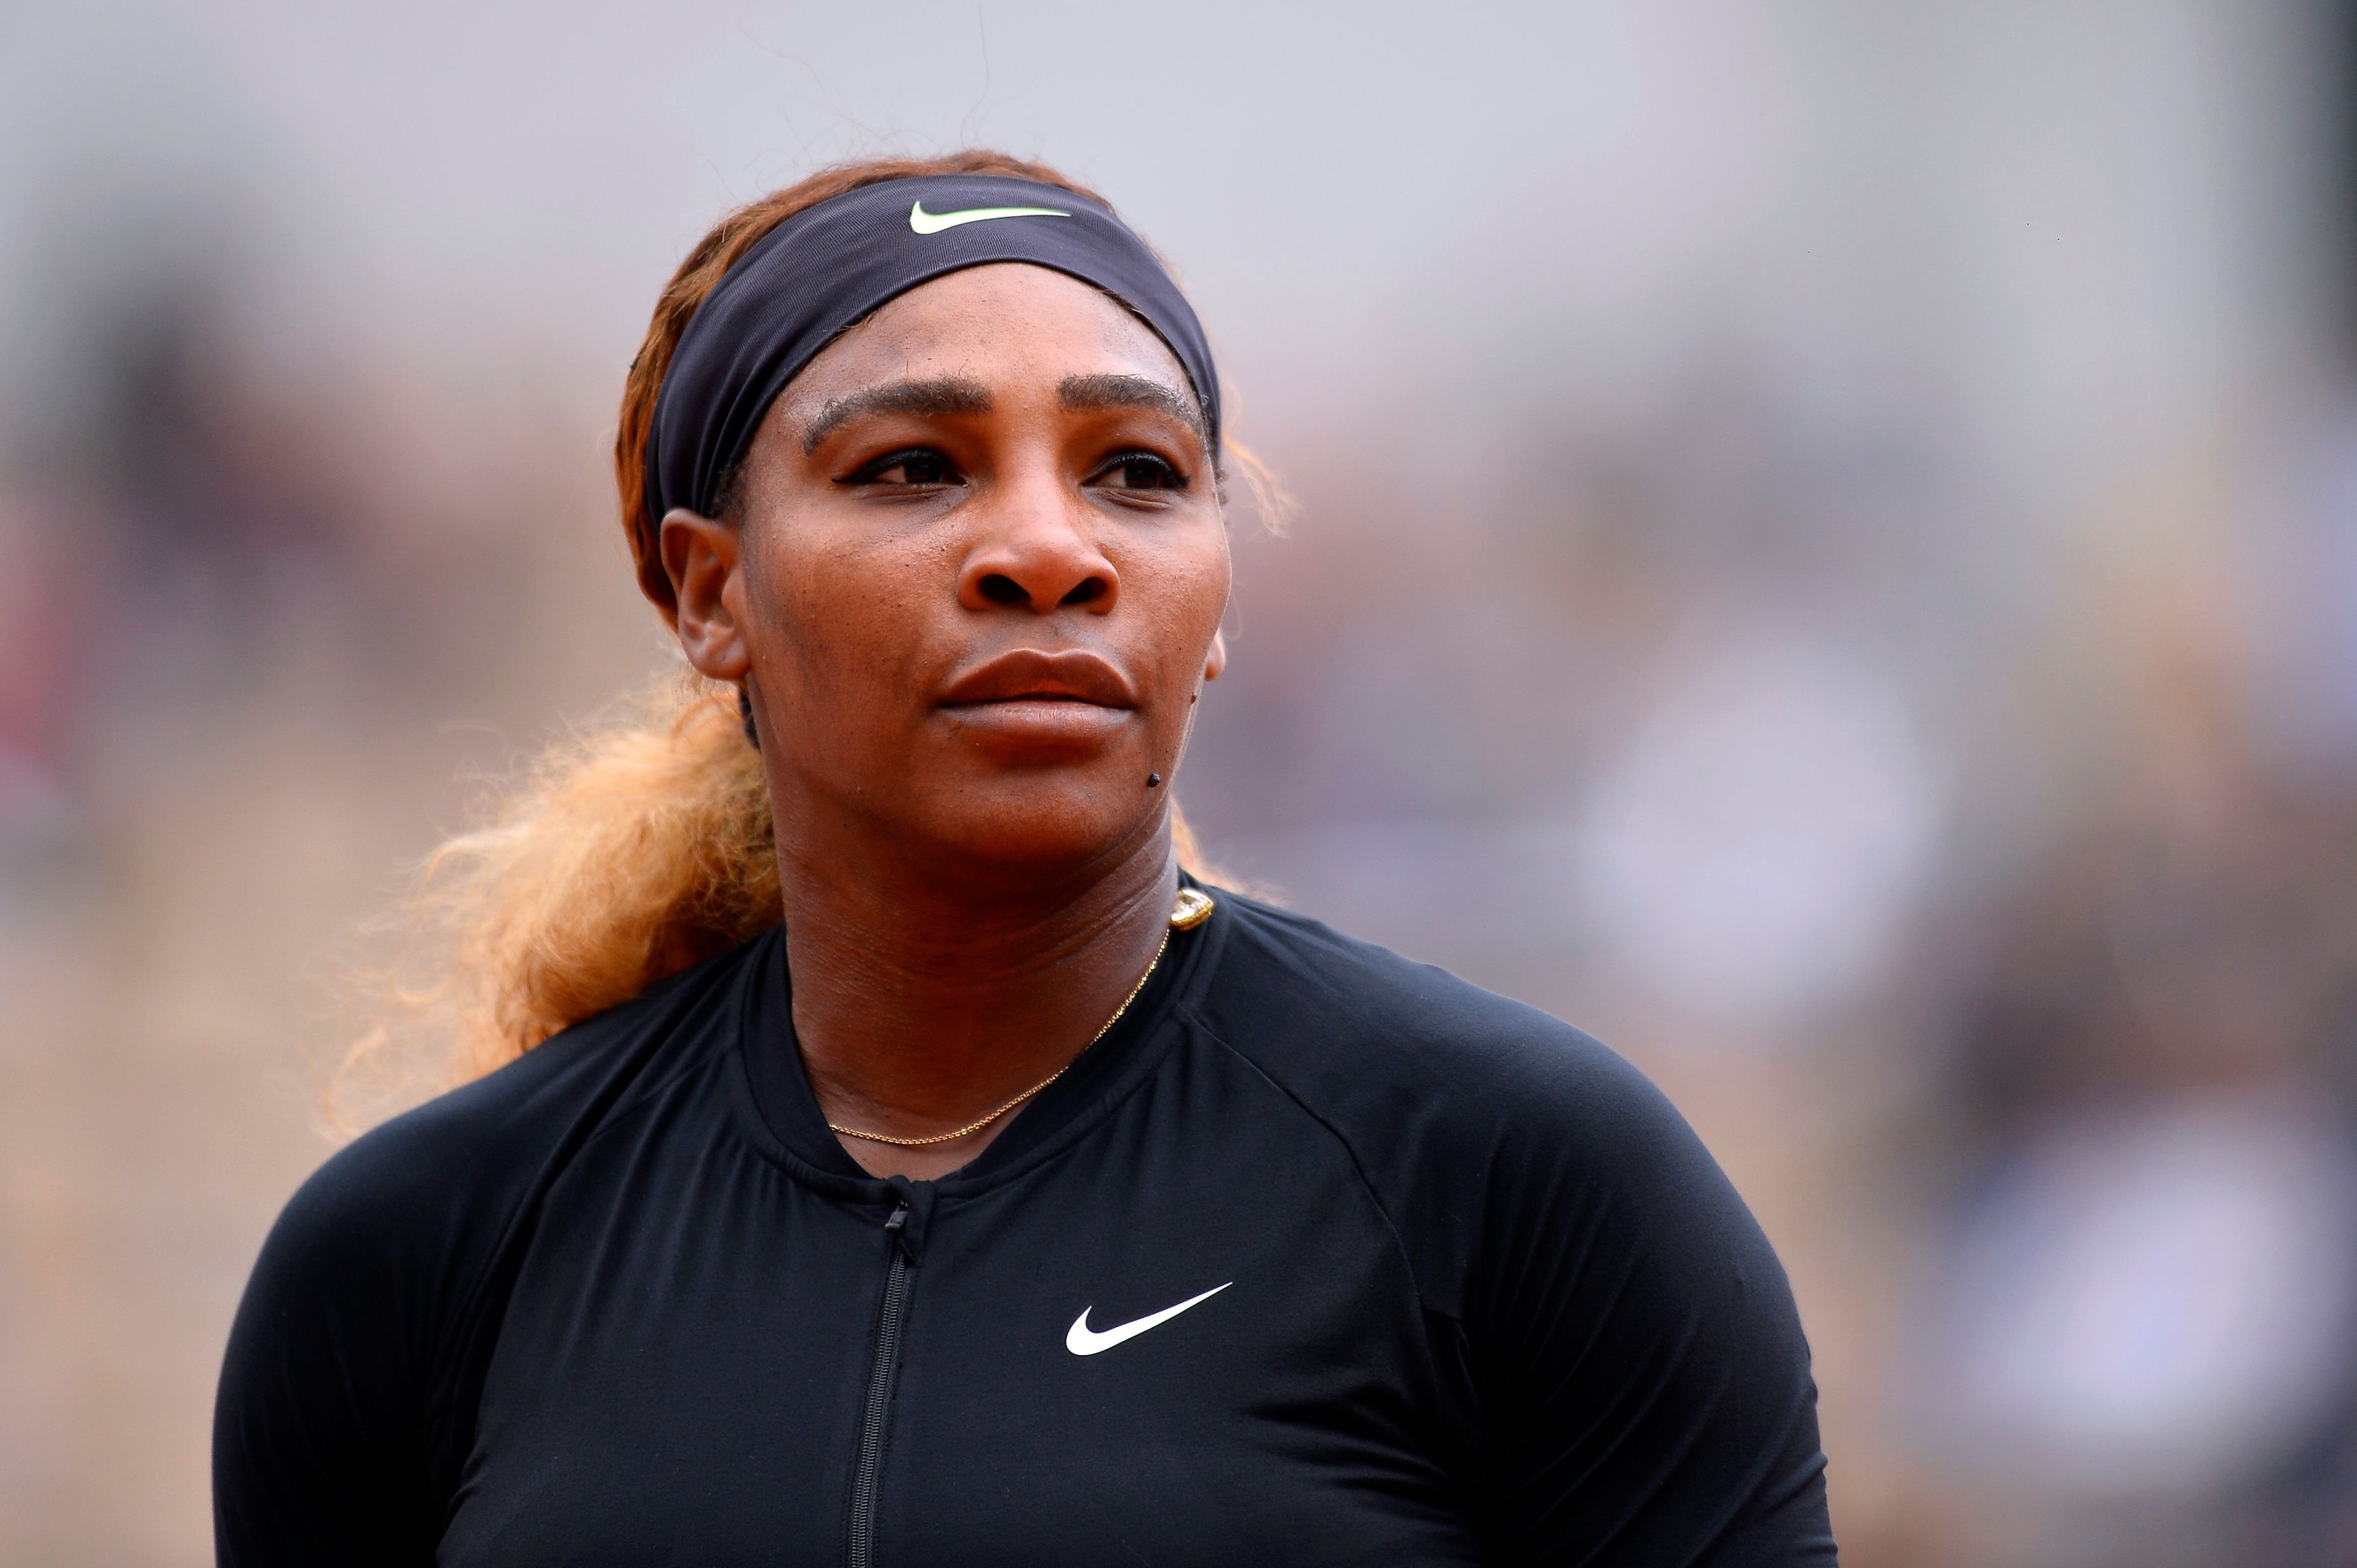 Serena Williams at the 2019 French Open at Roland Garros on May 30, 2019 | Photo: Getty Images